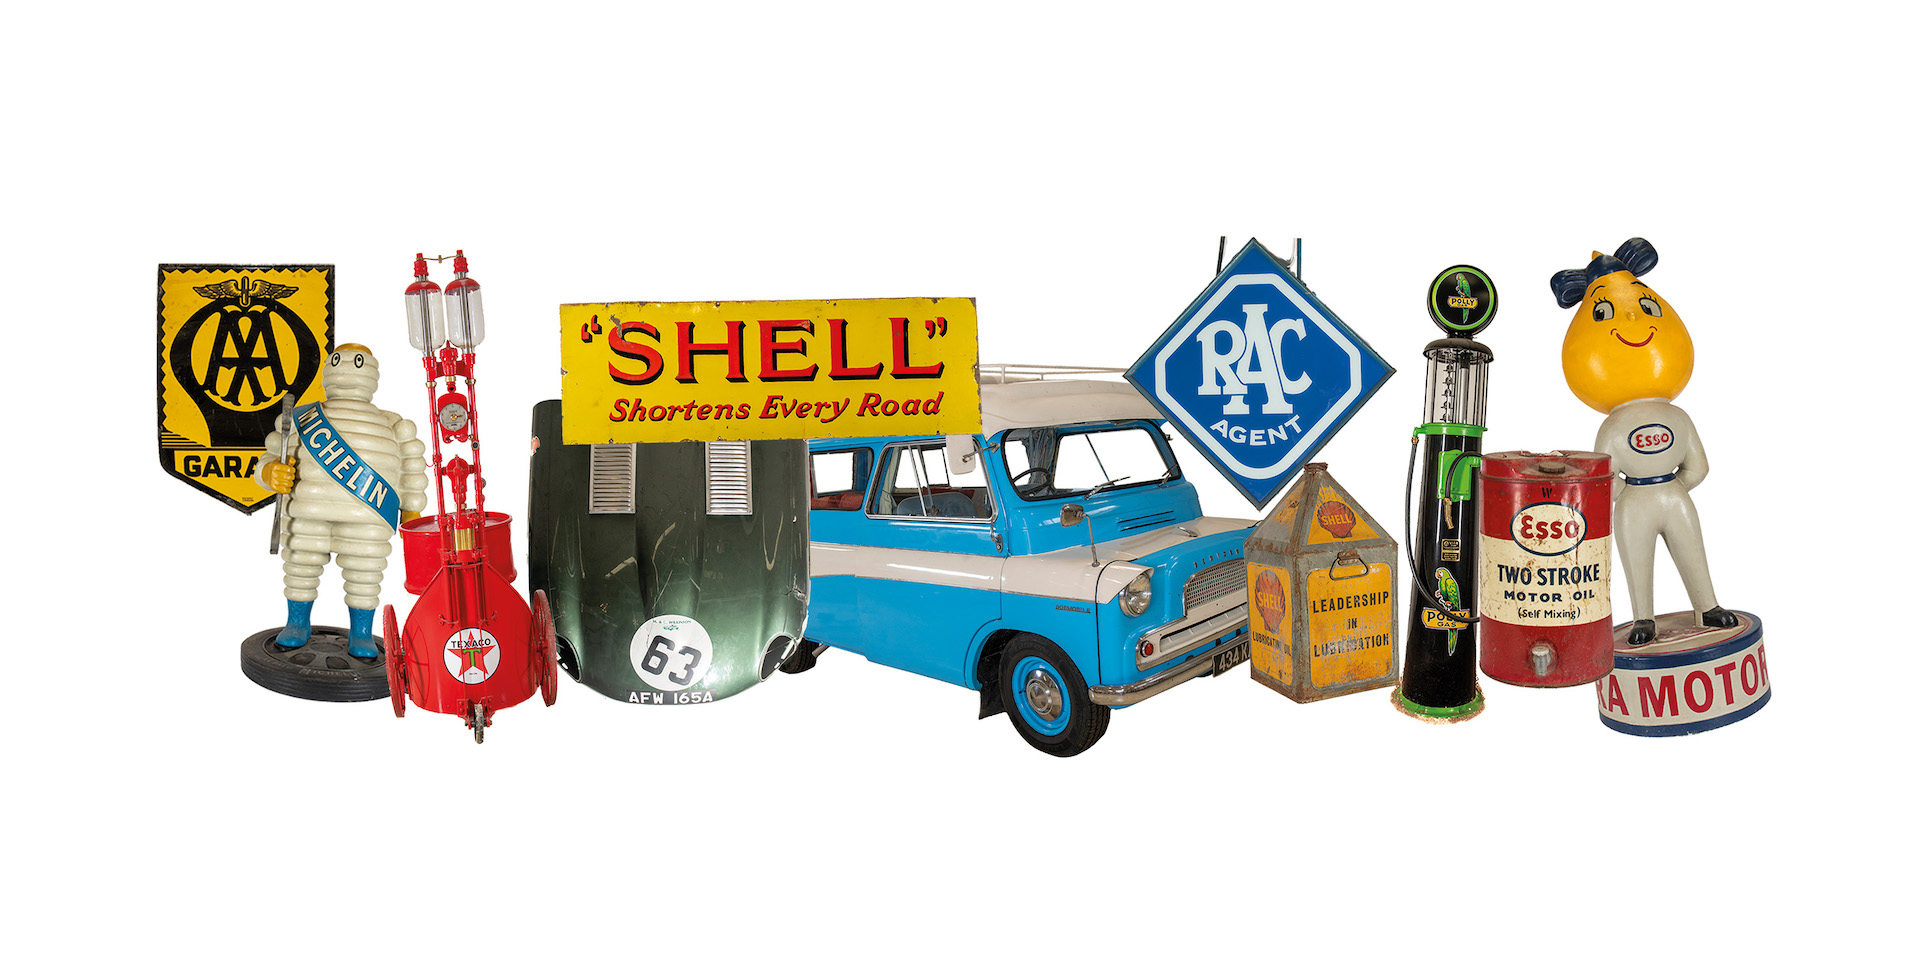 Fuel for Thought: This Petroliana Auction Is a Great Way to Get into Collectables